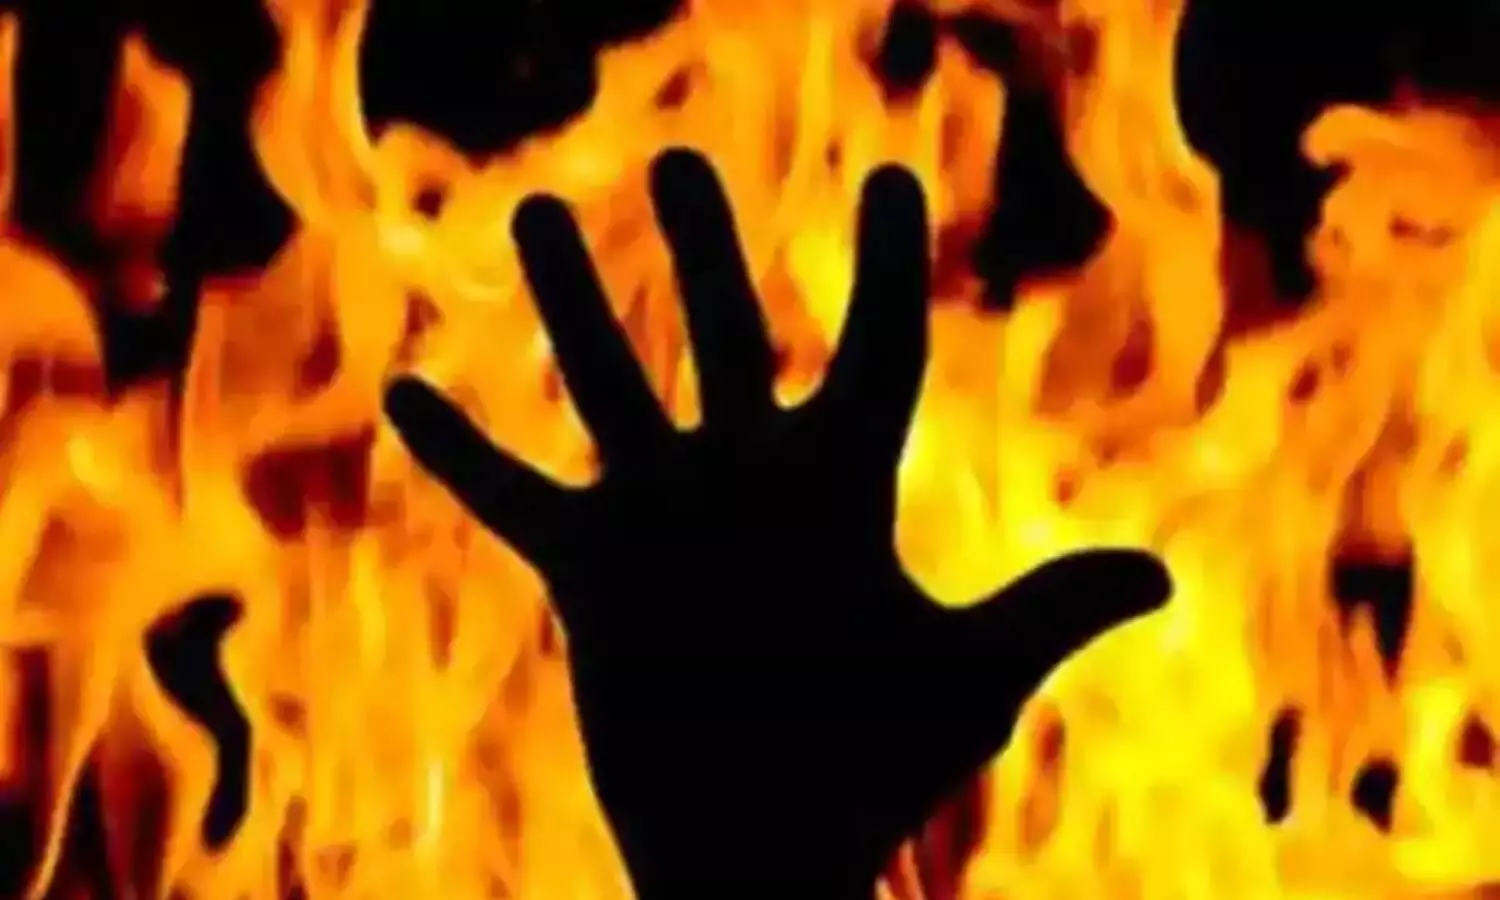 After dinner with father Kolkata woman sets him on fire